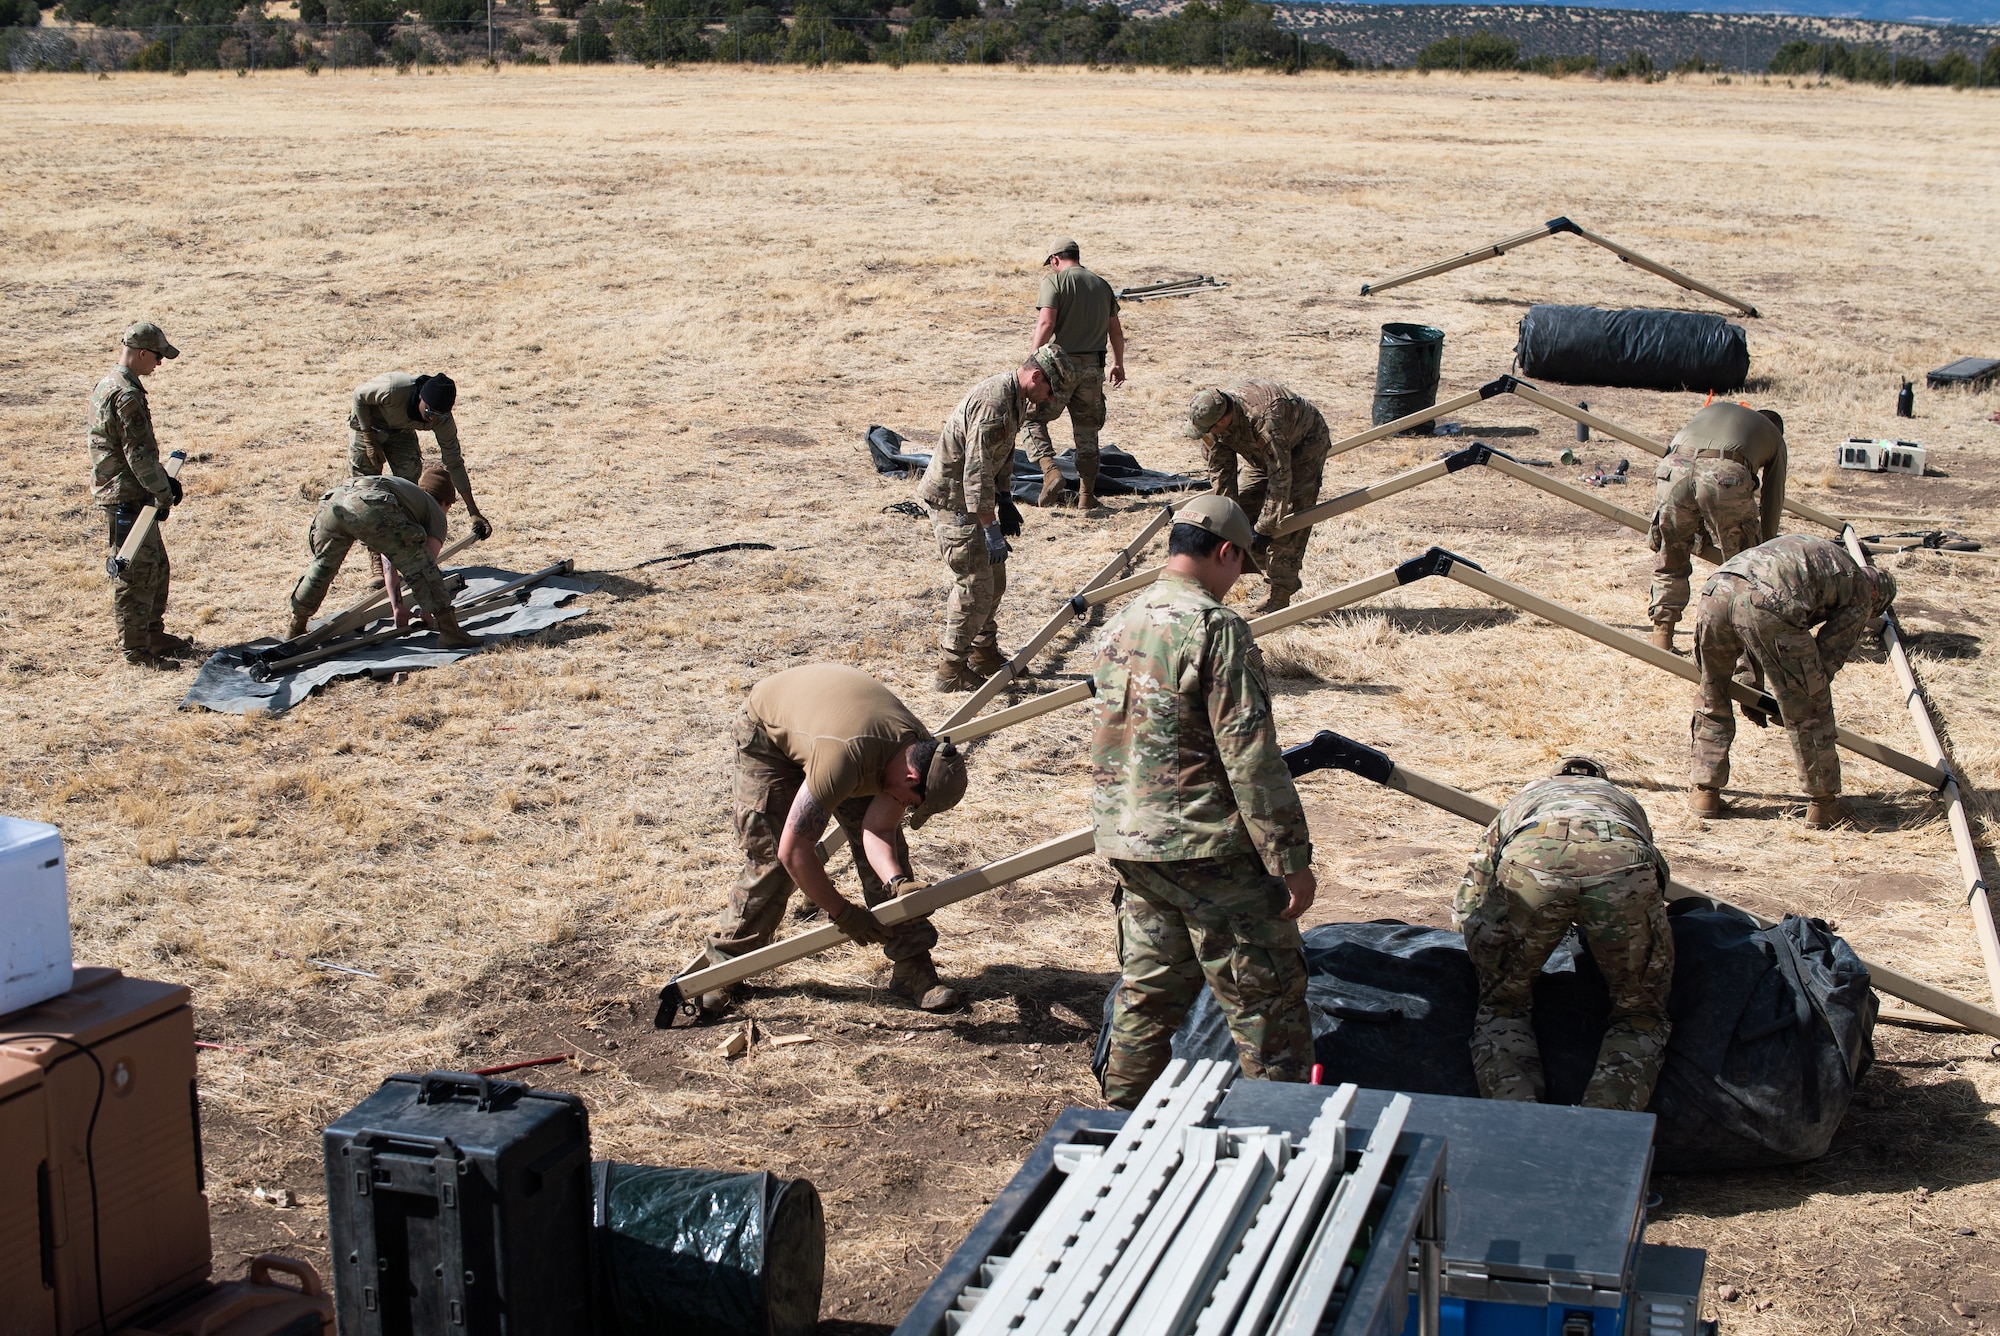 Air Commandos from the 27th Special Operations Mission Support Group, Detachment 1 Mission Sustainment Team 2 teardown a Utilis TM-54 tent during Full Mission Profile 22-3 exercise at Sierra Blanca Regional Airport. (U.S. Air Force photo by Senior Airman Christopher Storer)